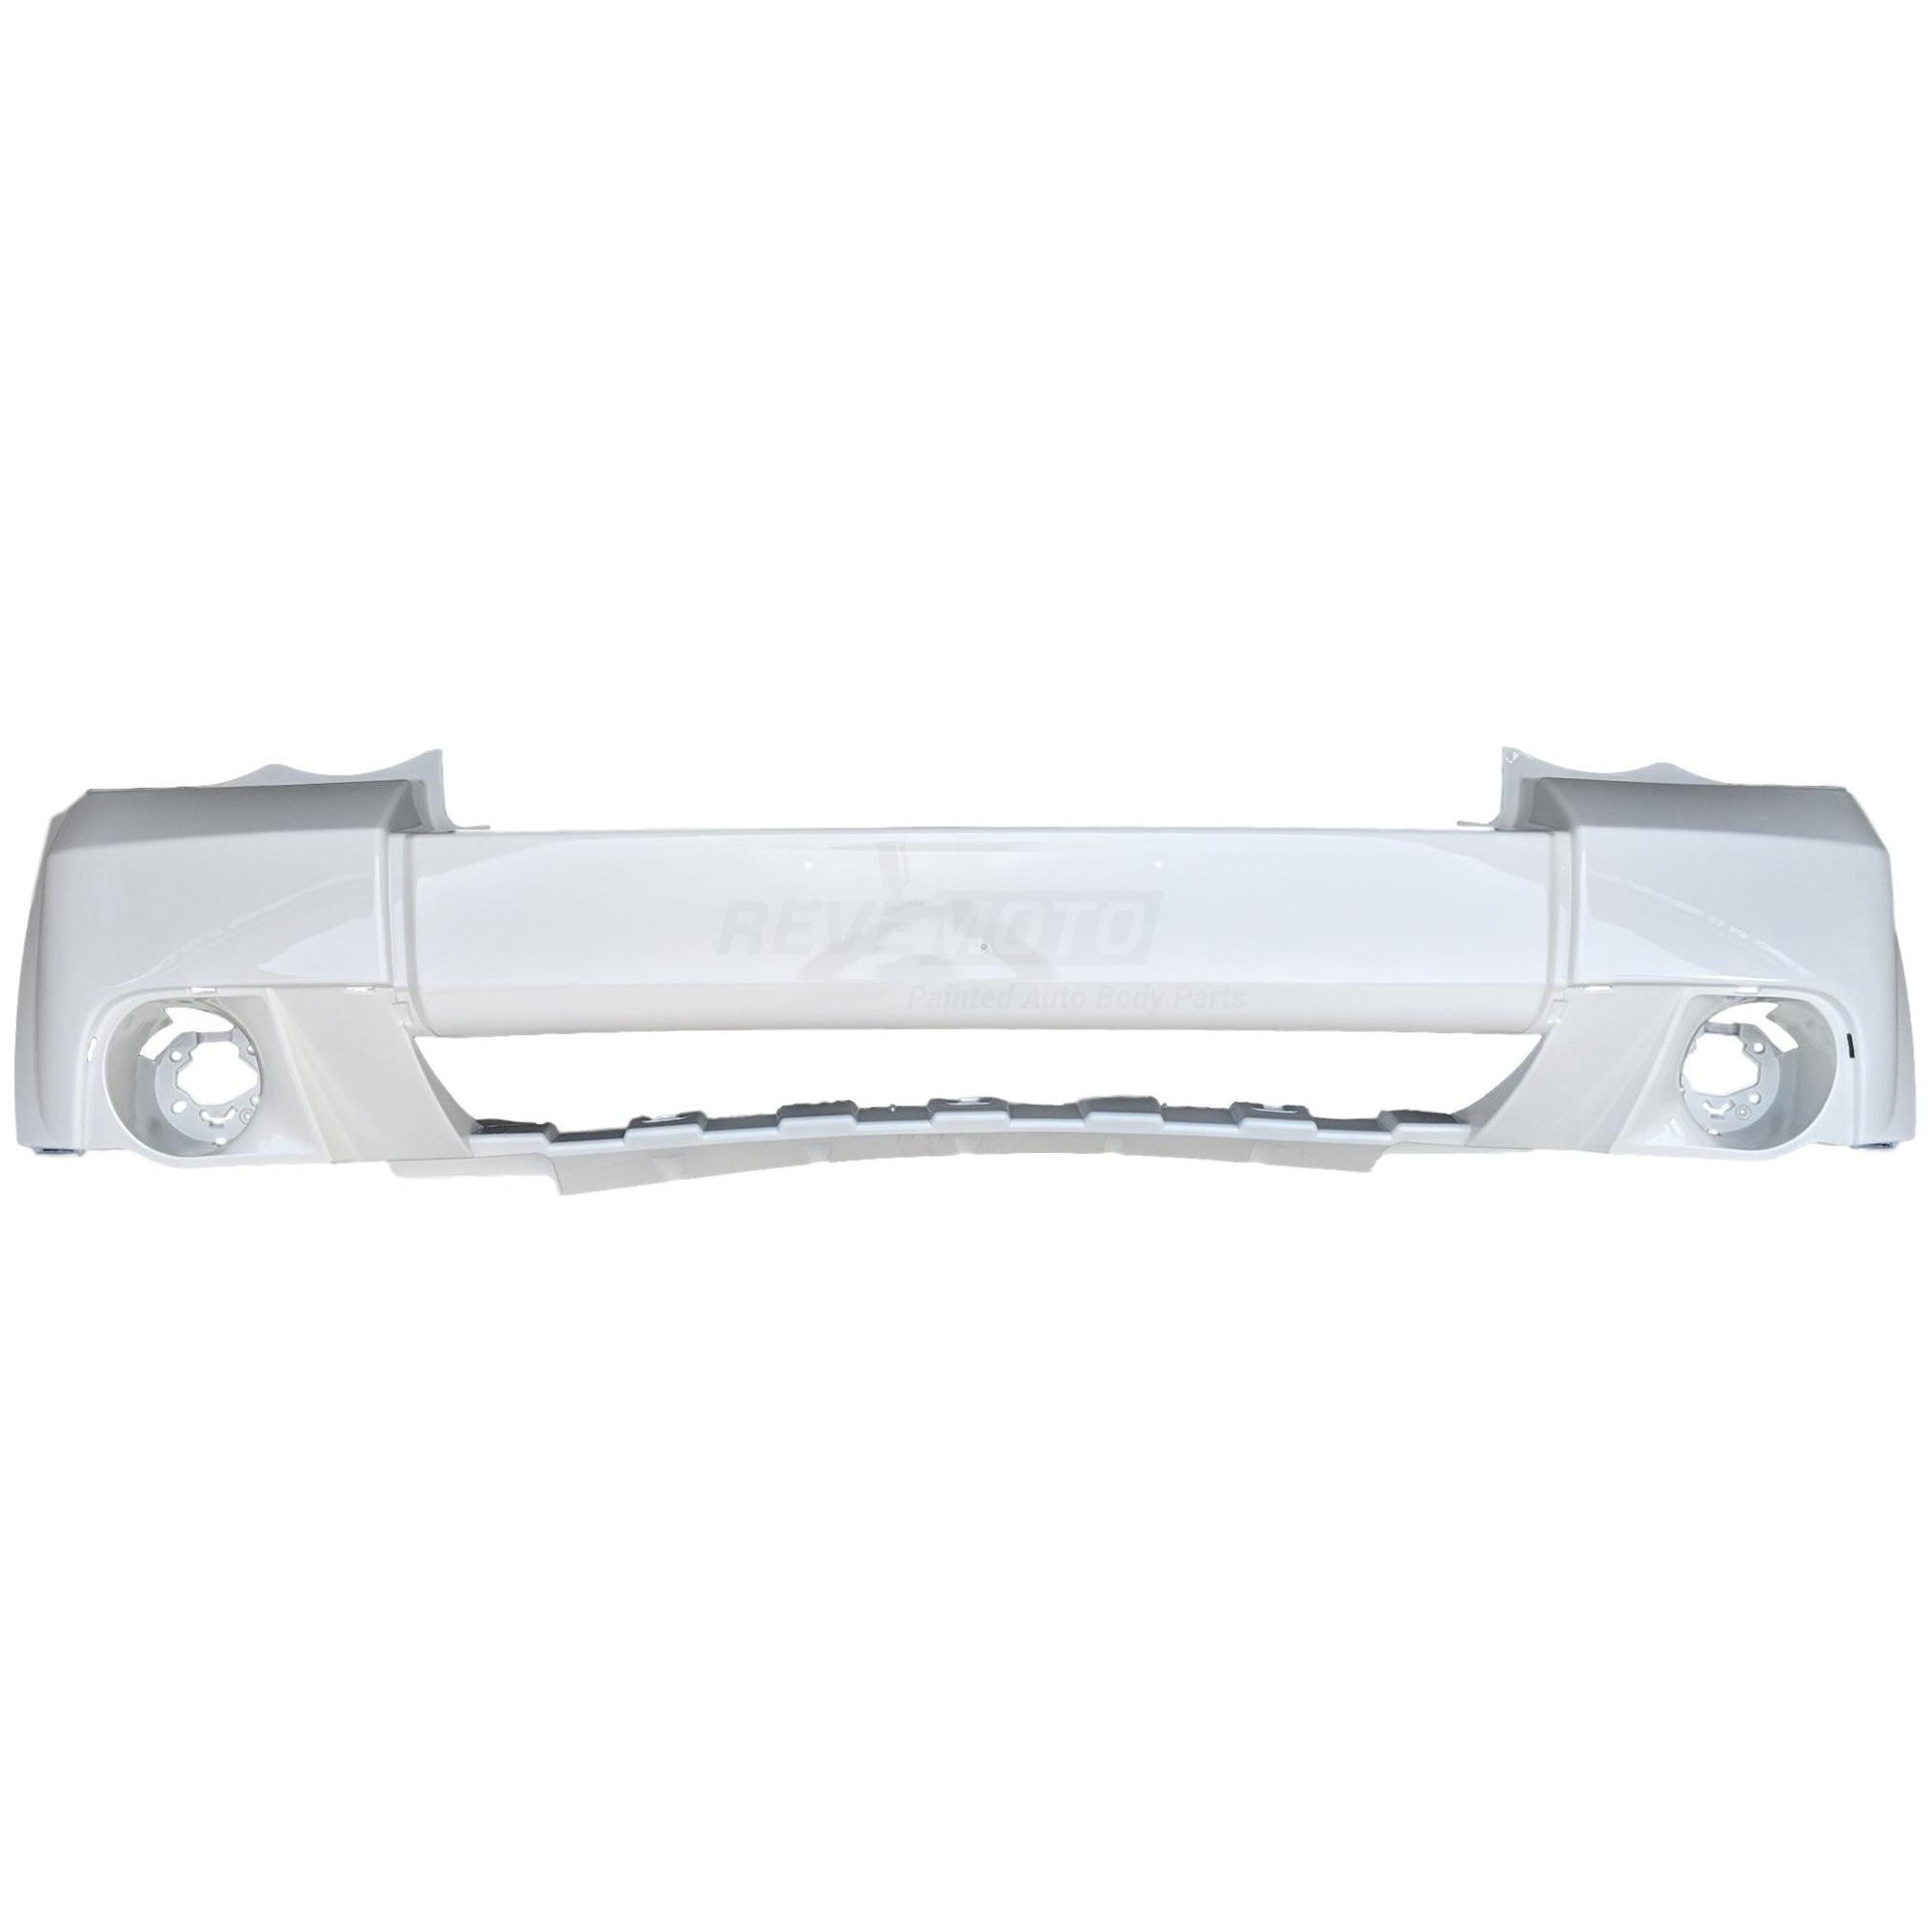 2008 Jeep Grand Cherokee Front Bumper, Laredo, Limited, Without Chrome Insert, Painted  Stone White (PW1) 68033744AB CH1000932